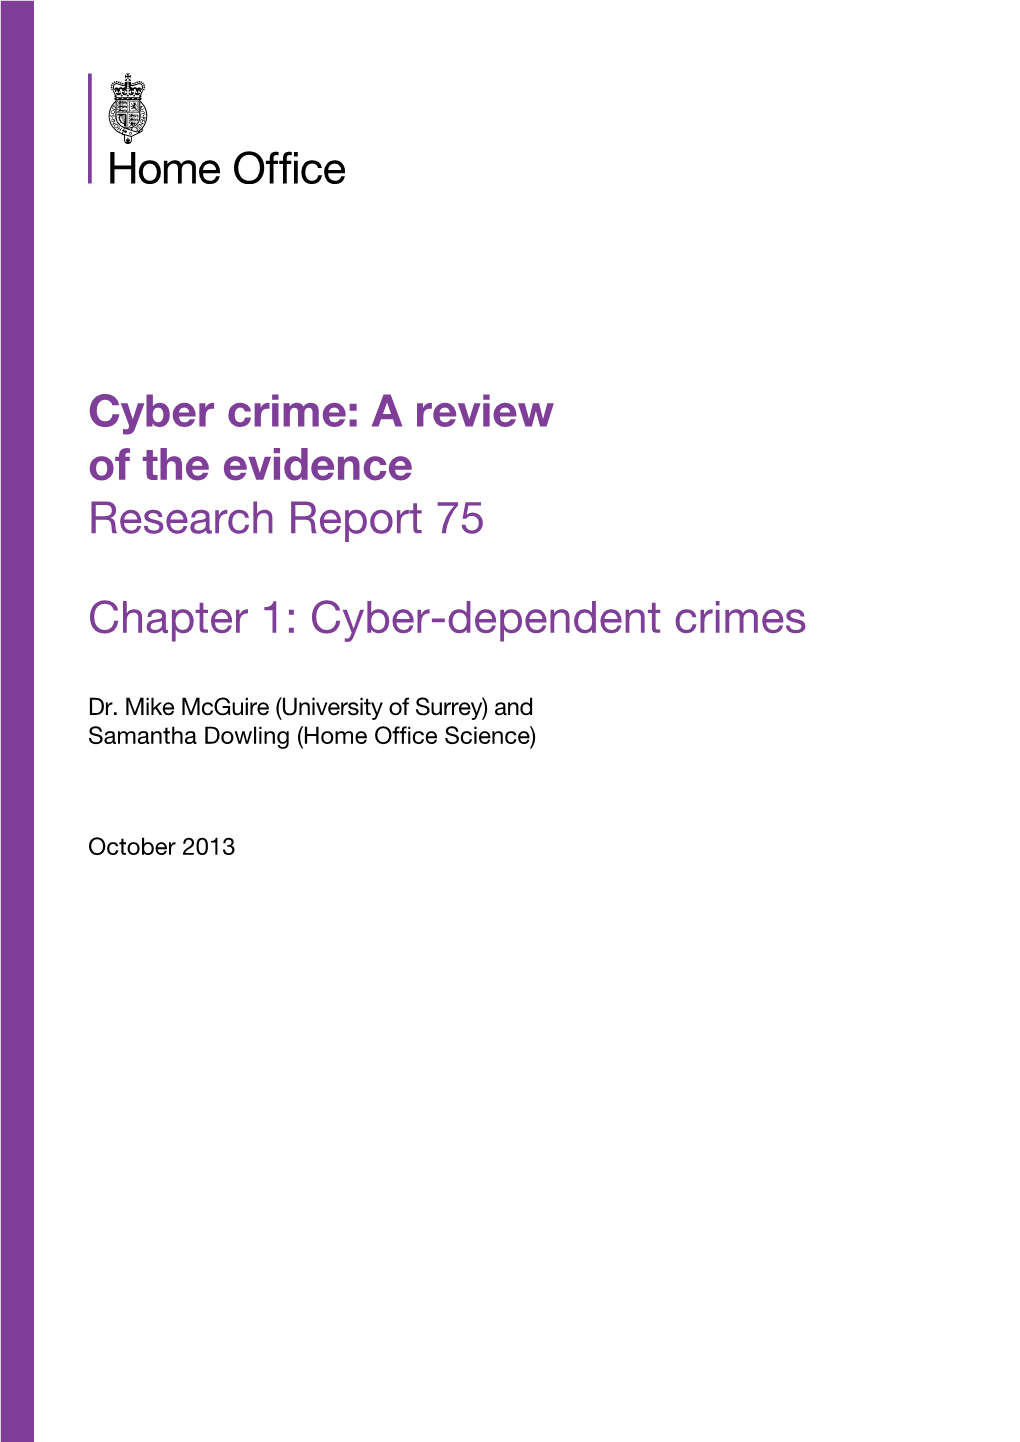 A Review of the Evidence Chapter 1: Cyber-Dependent Crimes